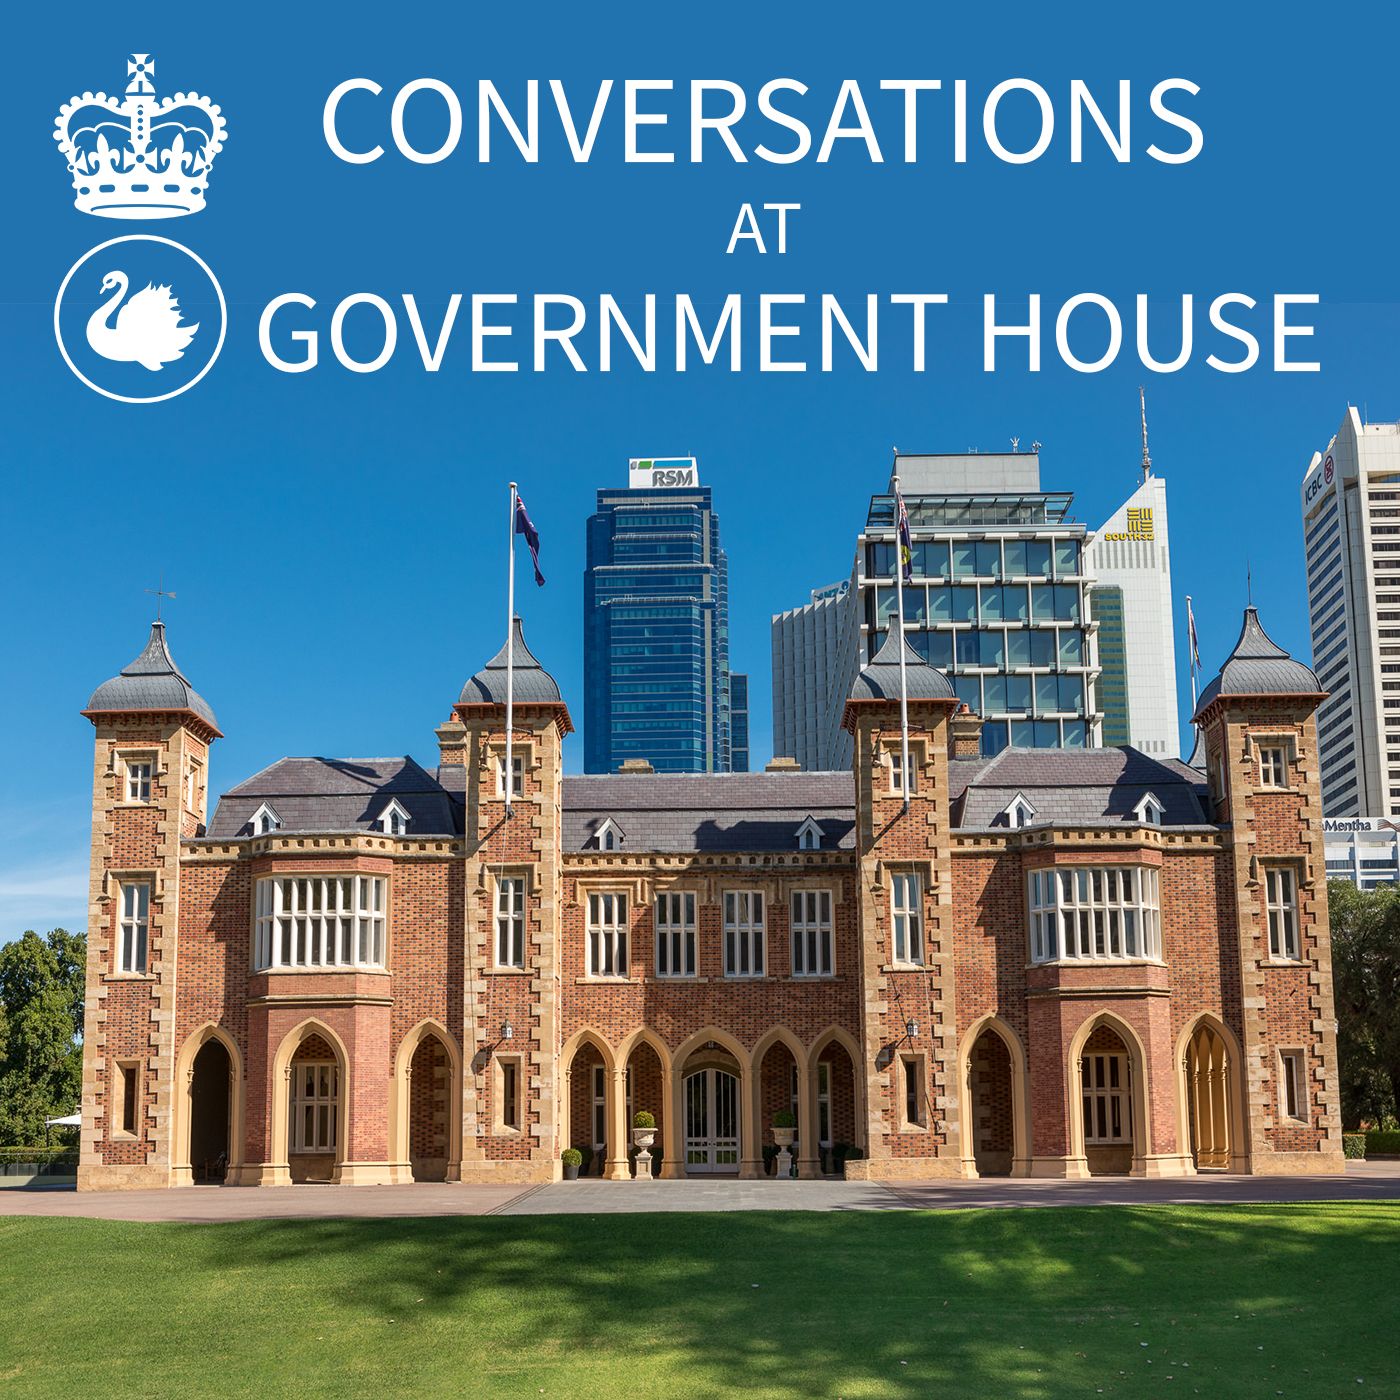 Conversations at Government House